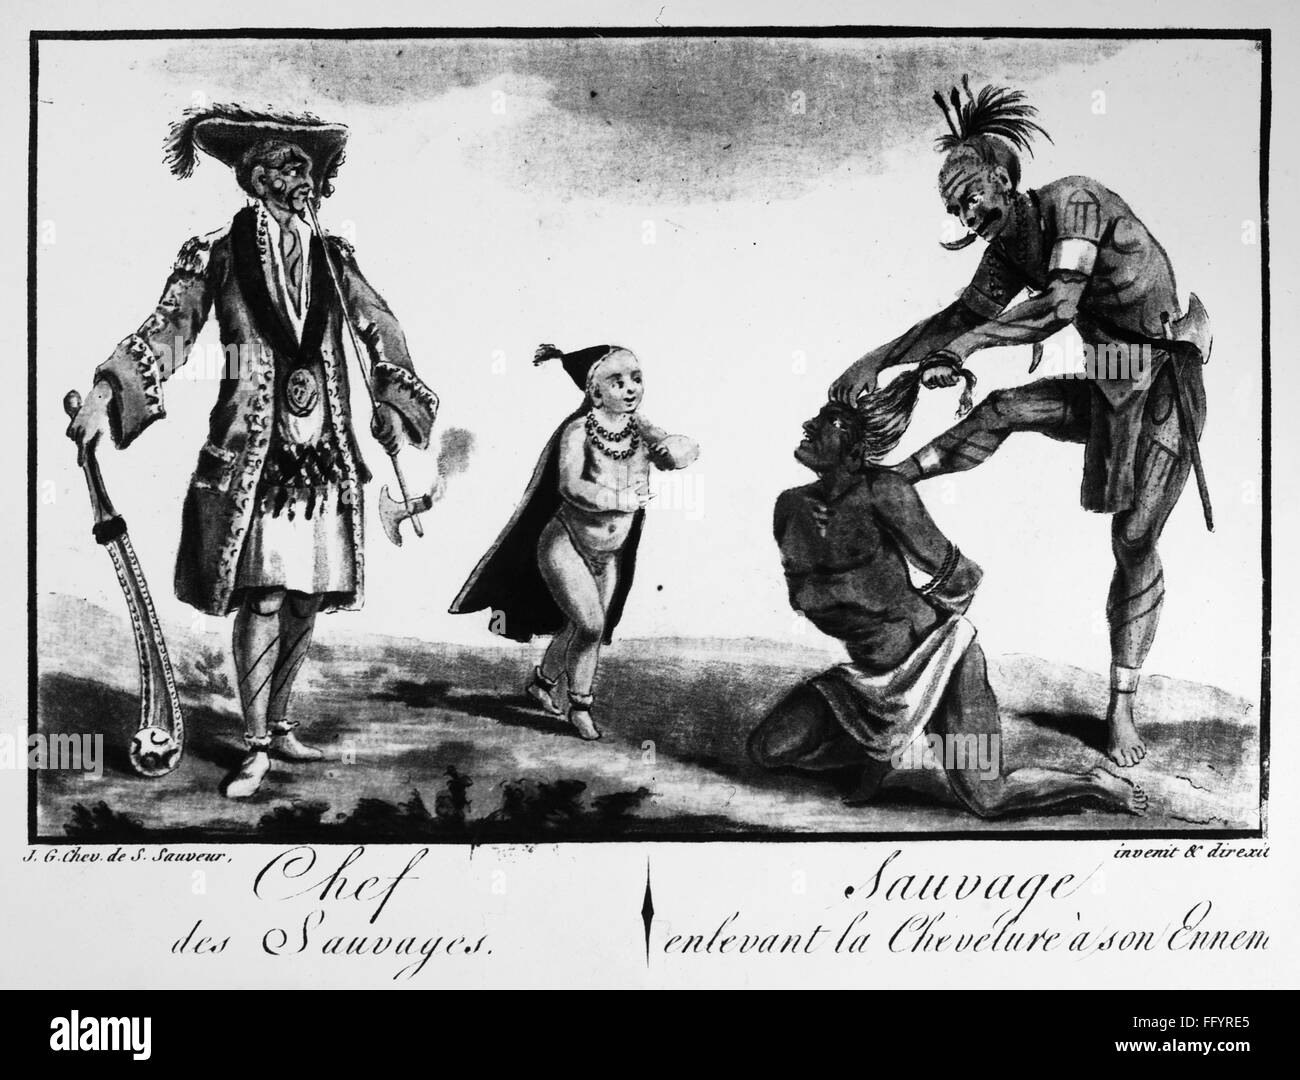 IROQUOIS CHIEF AND WARRIOR. /nA chief in European dress, a child, and a warrior scalping an enemy. Aquatint, c1787, by Jacques Grasset de Saint-Sauveur. Stock Photo